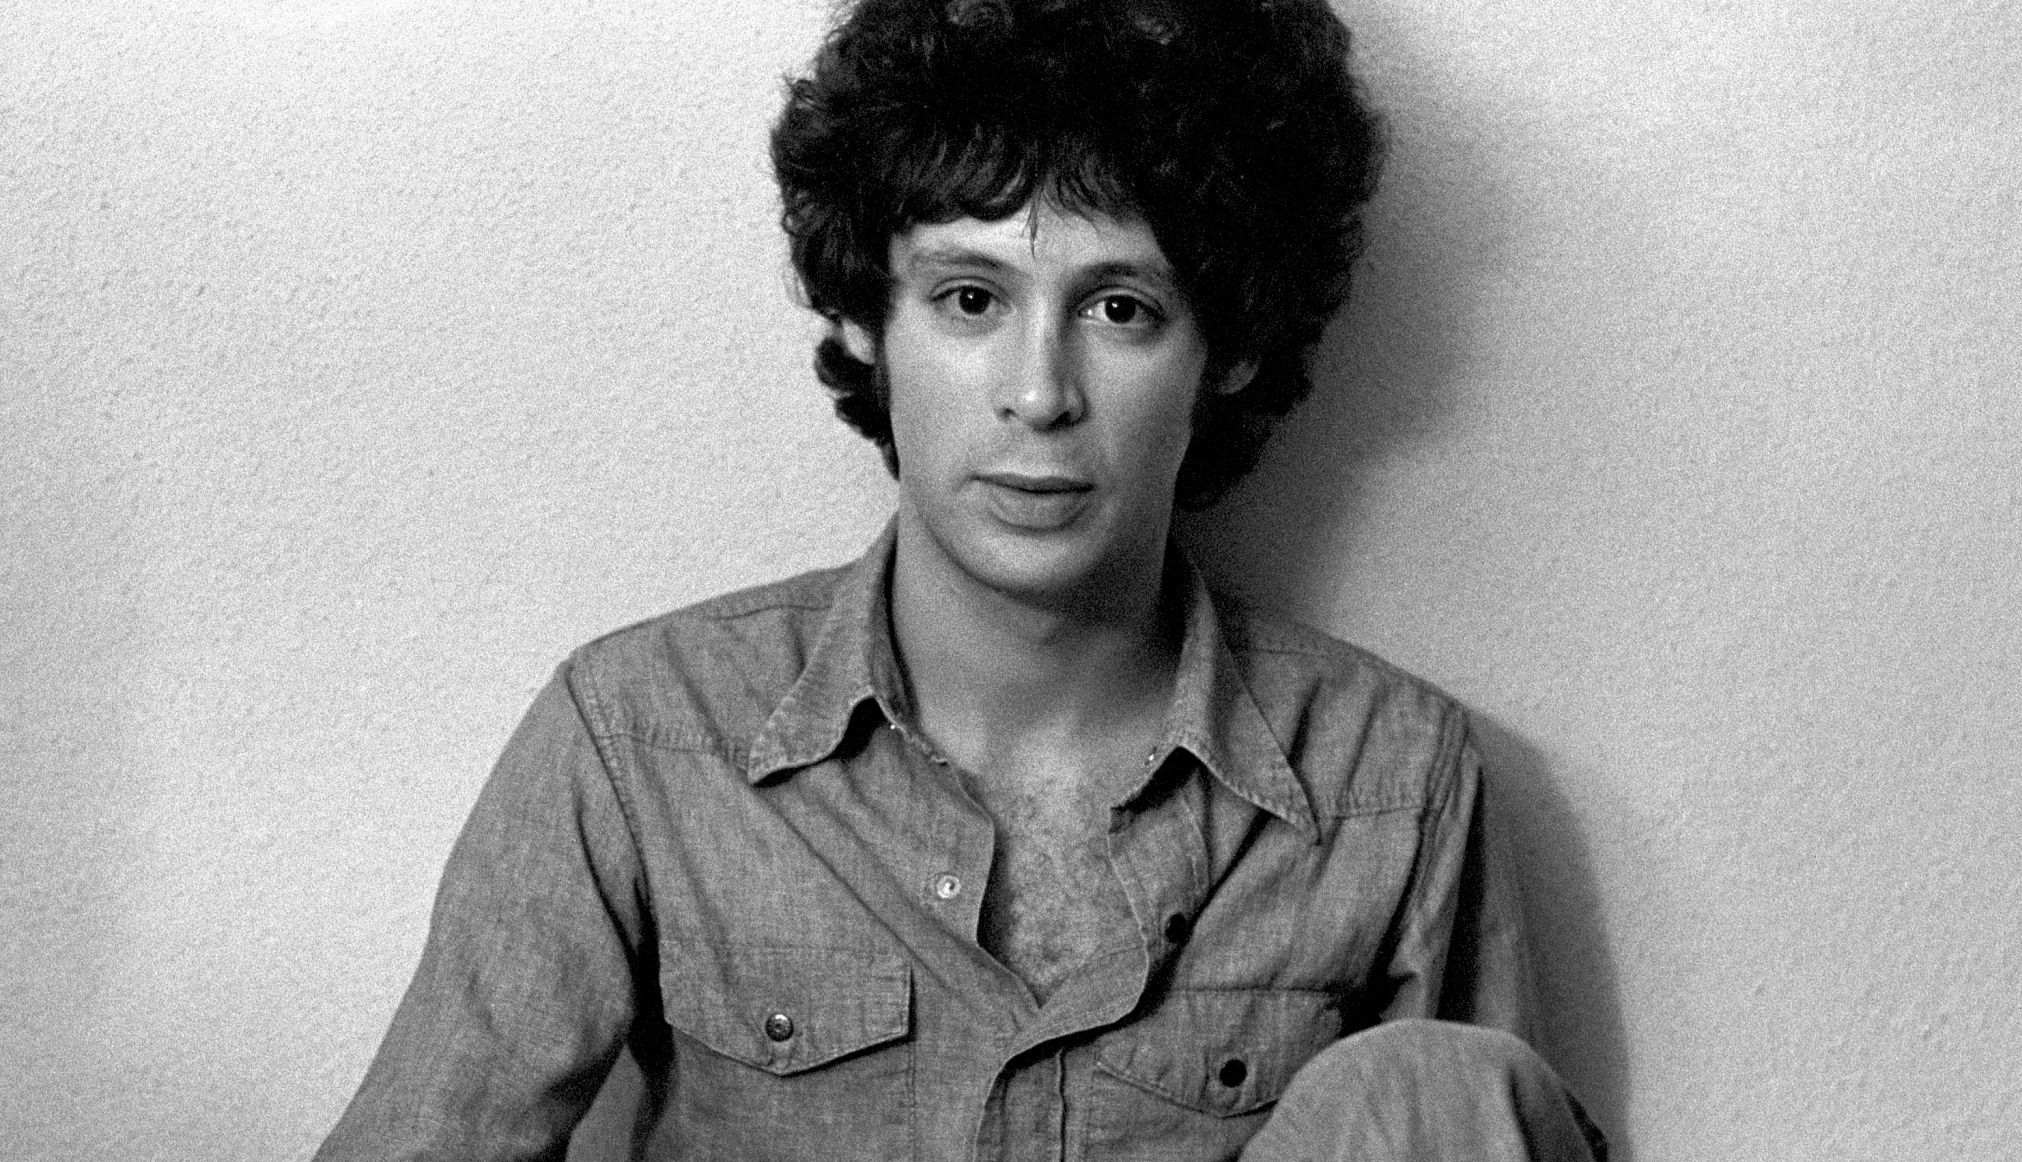 Eric Carmen, former member of The Raspberries, is interviewed at The Holiday Inn Downtown on November 10, 1975 in Atlanta